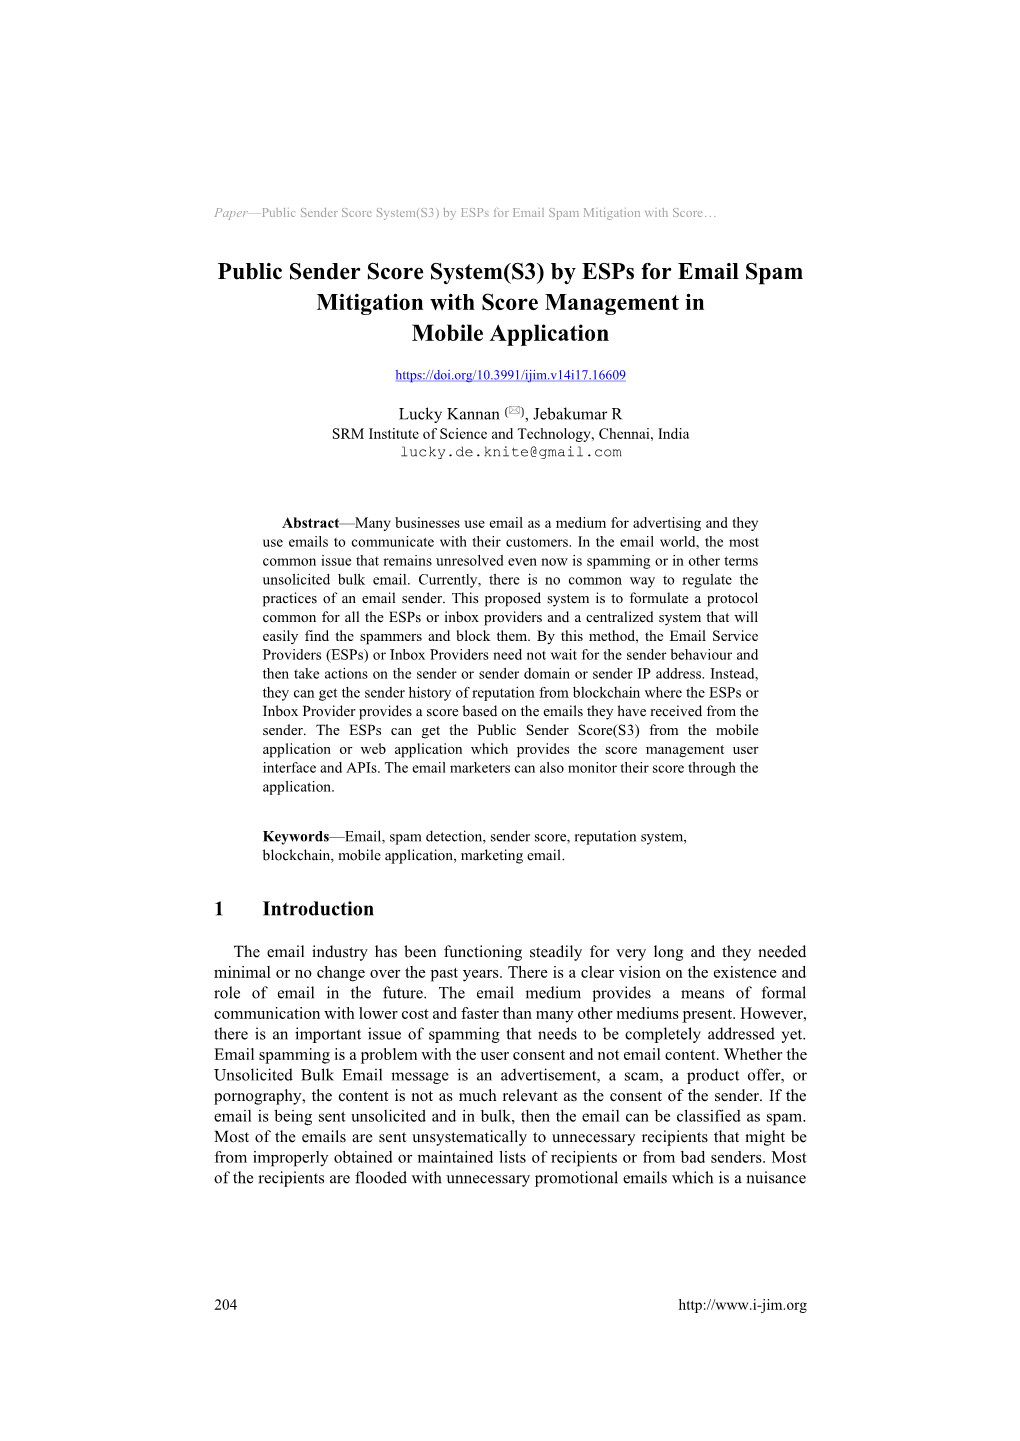 Public Sender Score System(S3) by Esps for Email Spam Mitigation with Score…